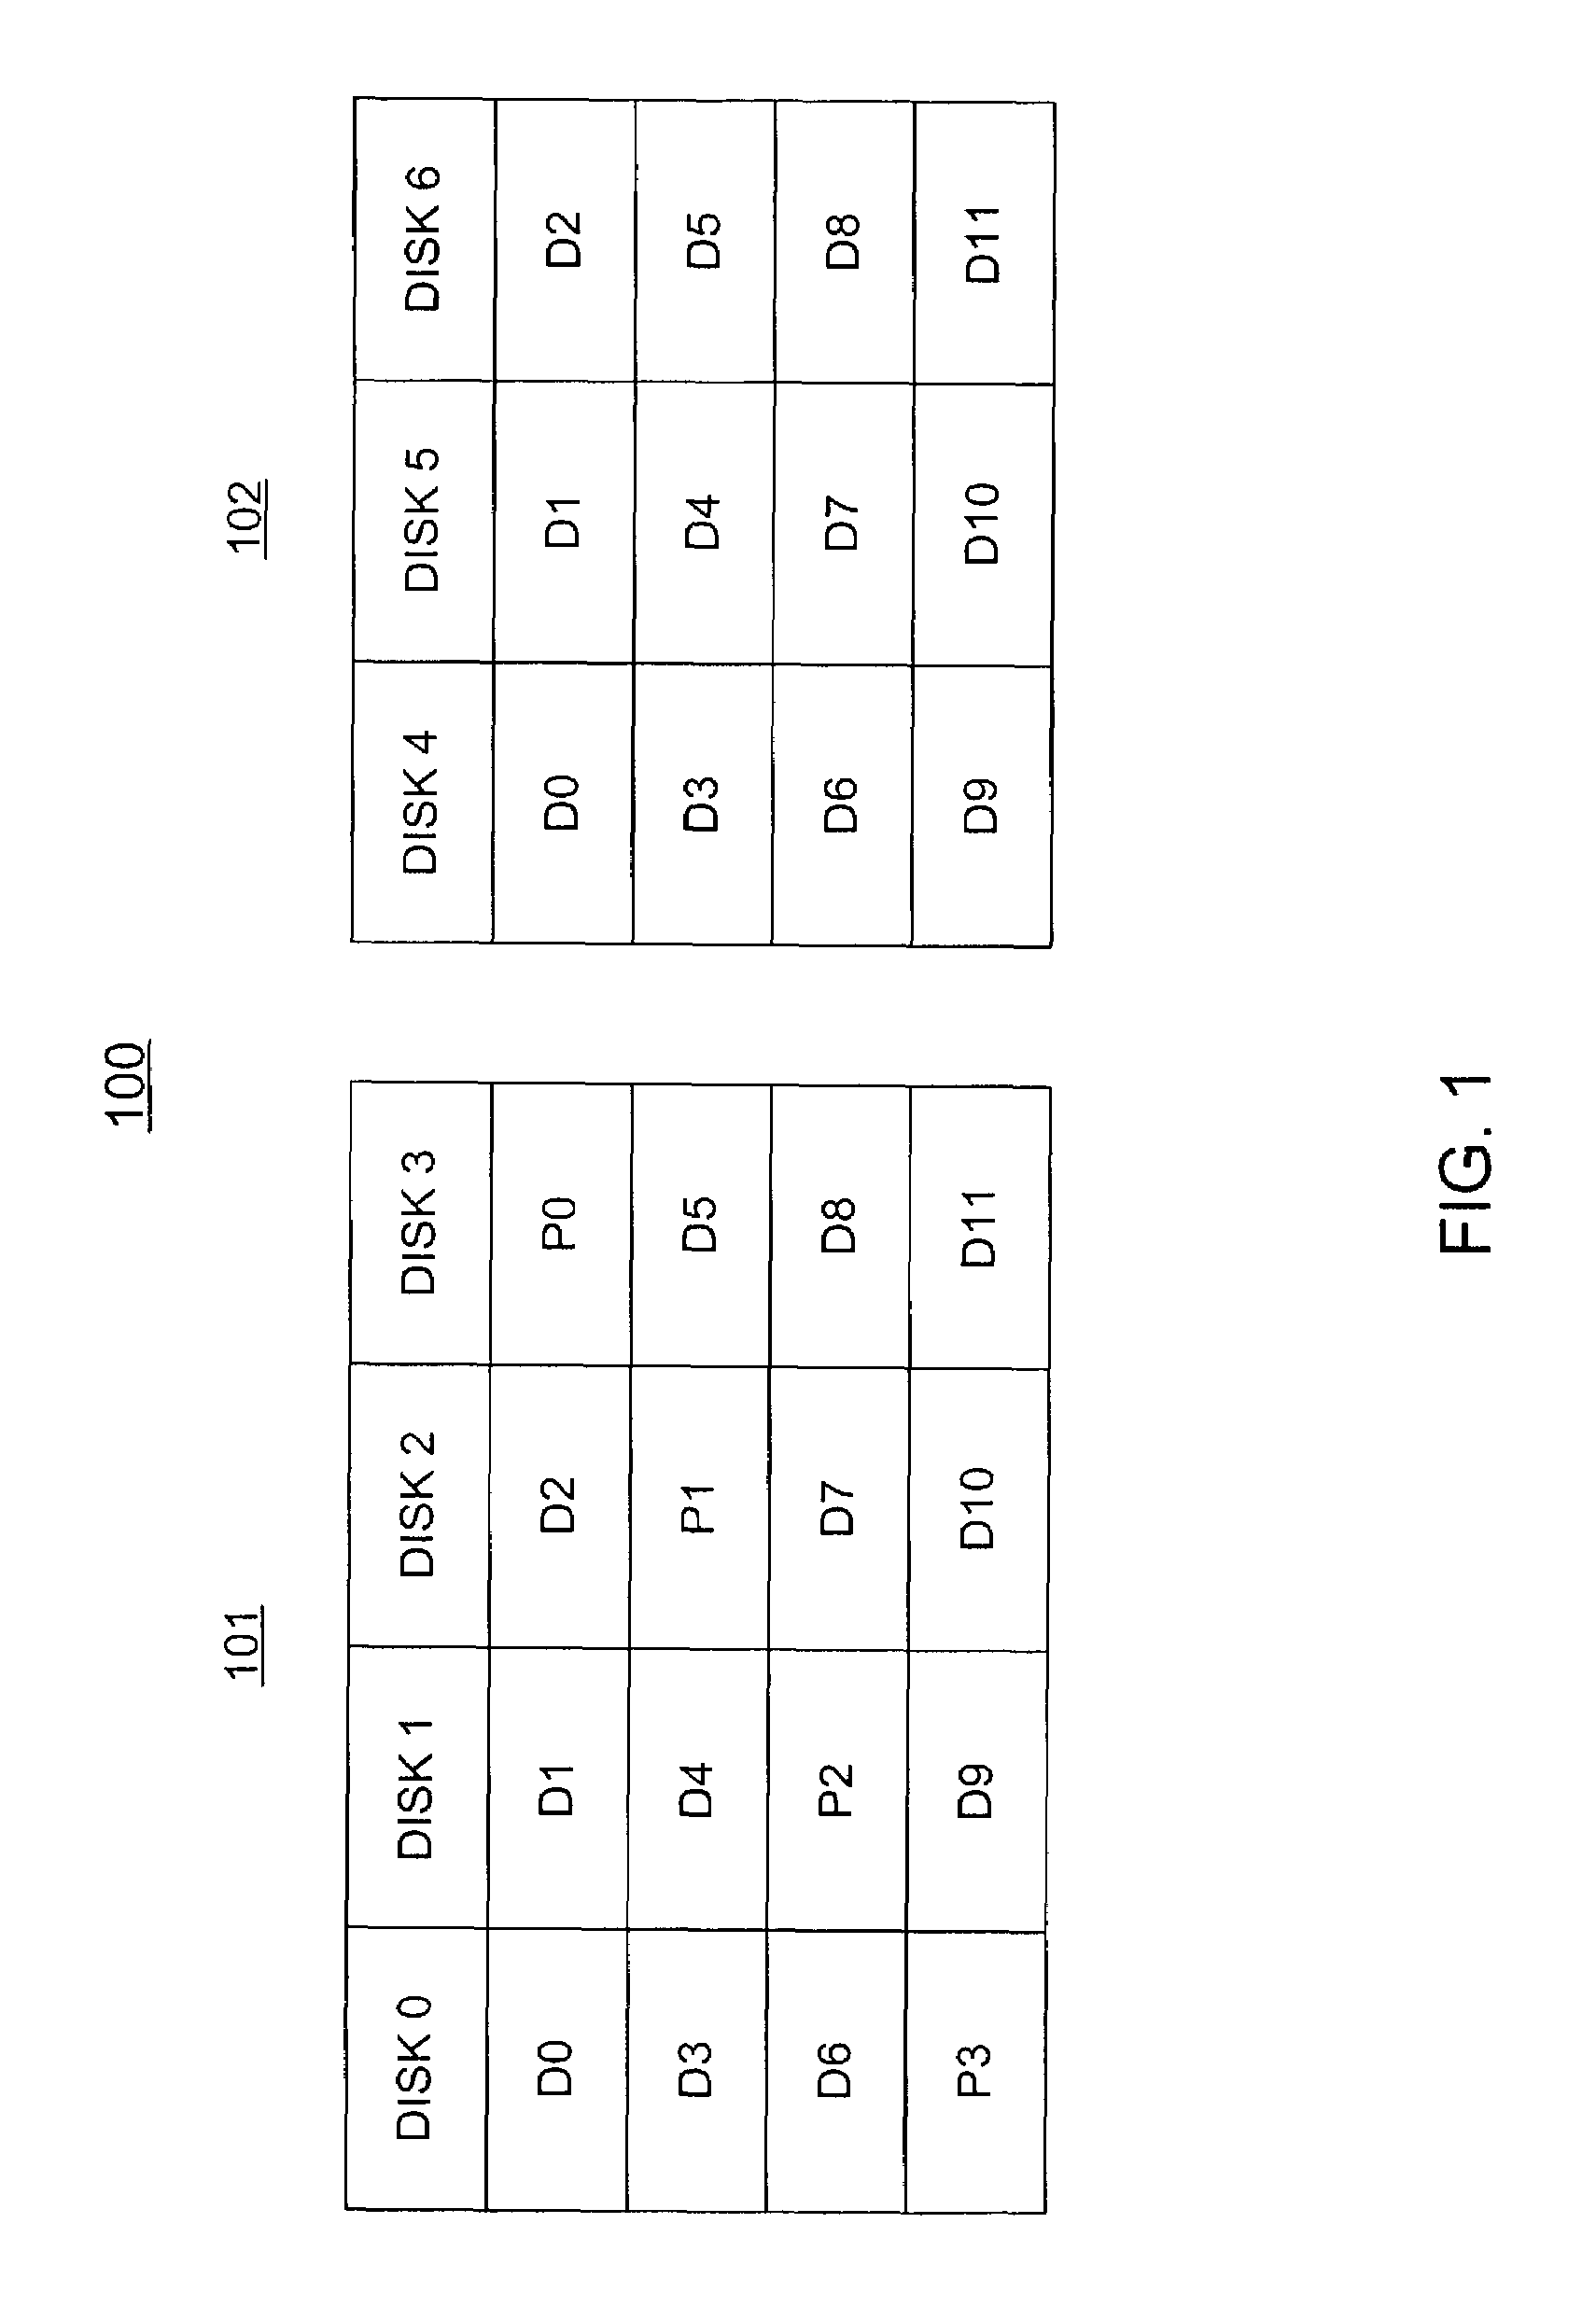 Method and means for tolerating multiple dependent or arbitrary double disk failures in a disk array